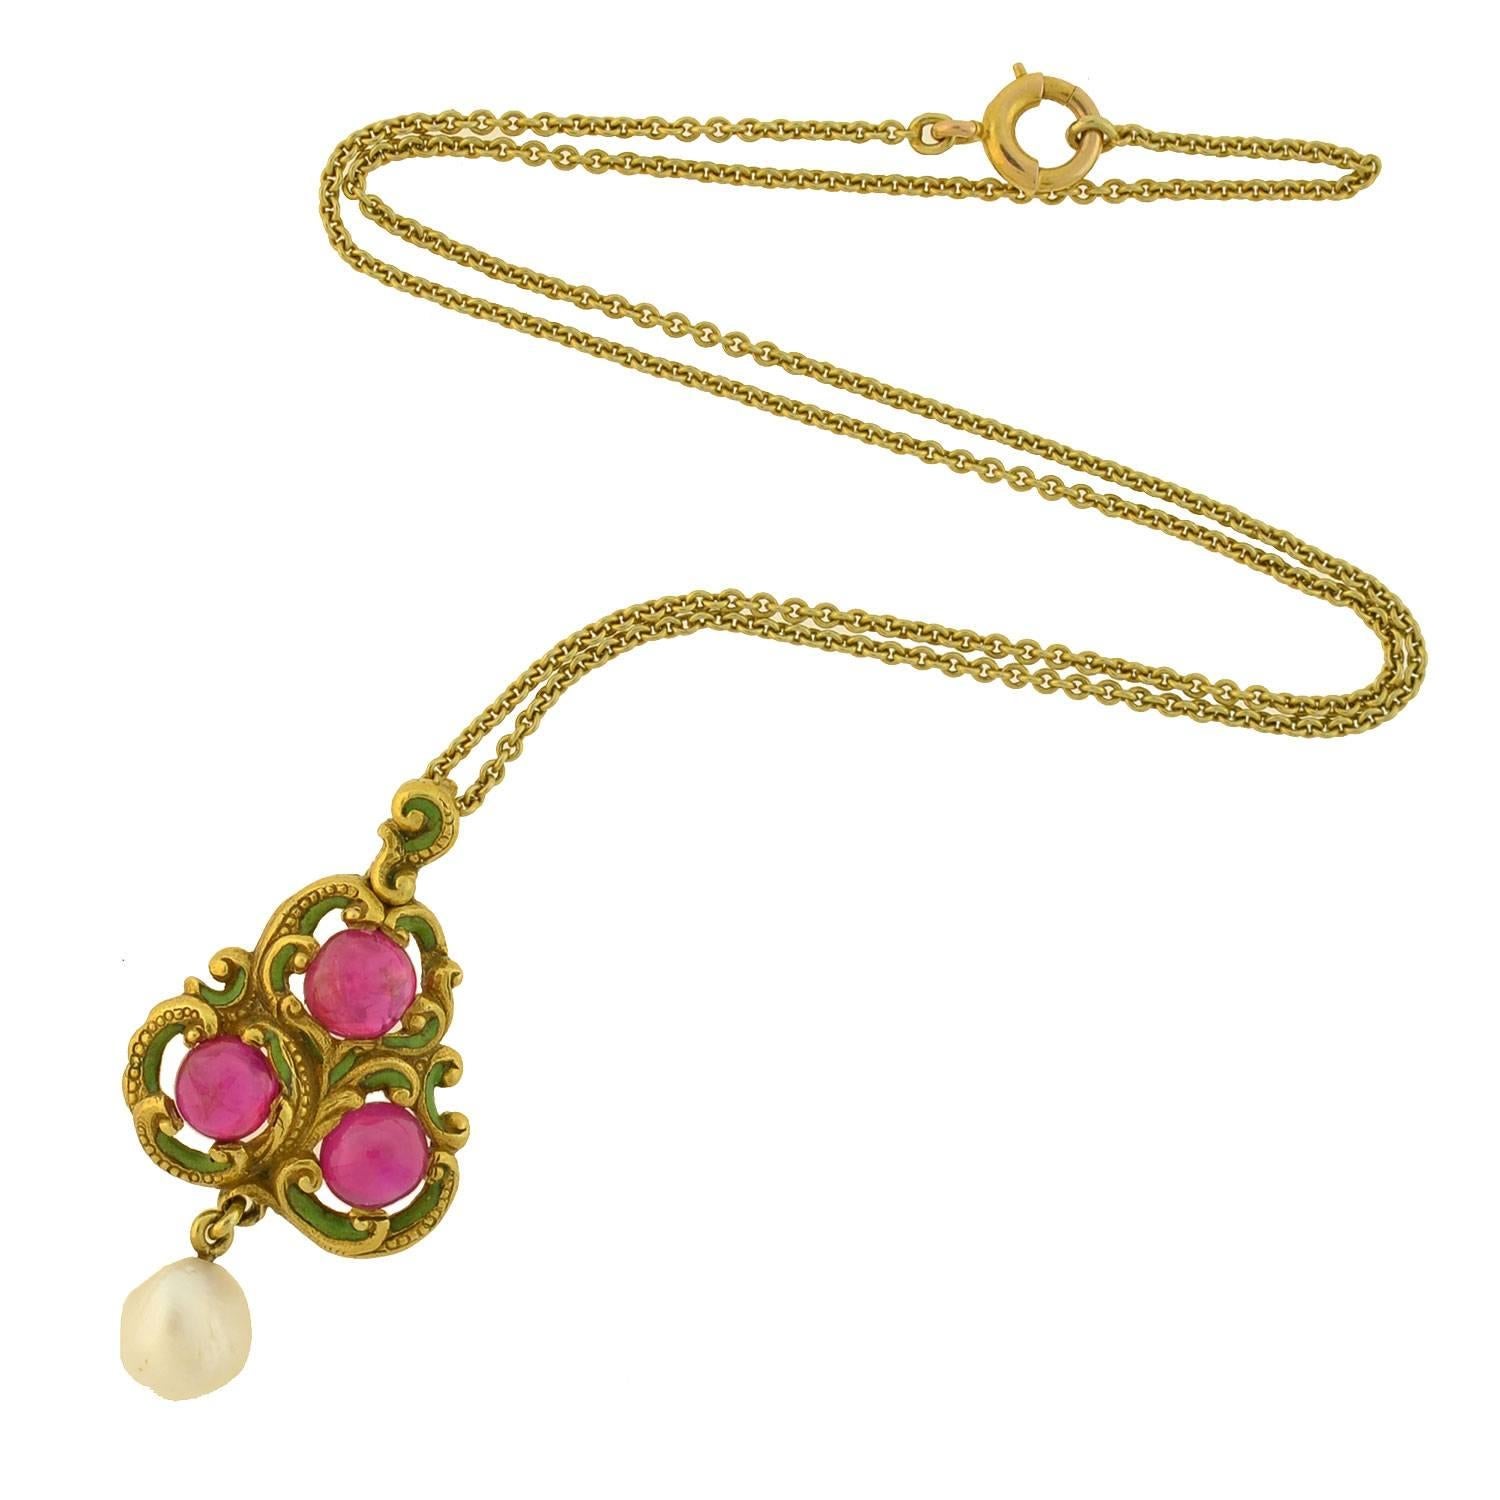 A beautiful and delicate natural ruby pendant from the Art Nouveau (ca1910) era! Made of 18kt yellow gold, this exquisite piece features three luscious Burmese ruby cabochons that form the shape of a flowing triangular pendant. Each ruby has an open